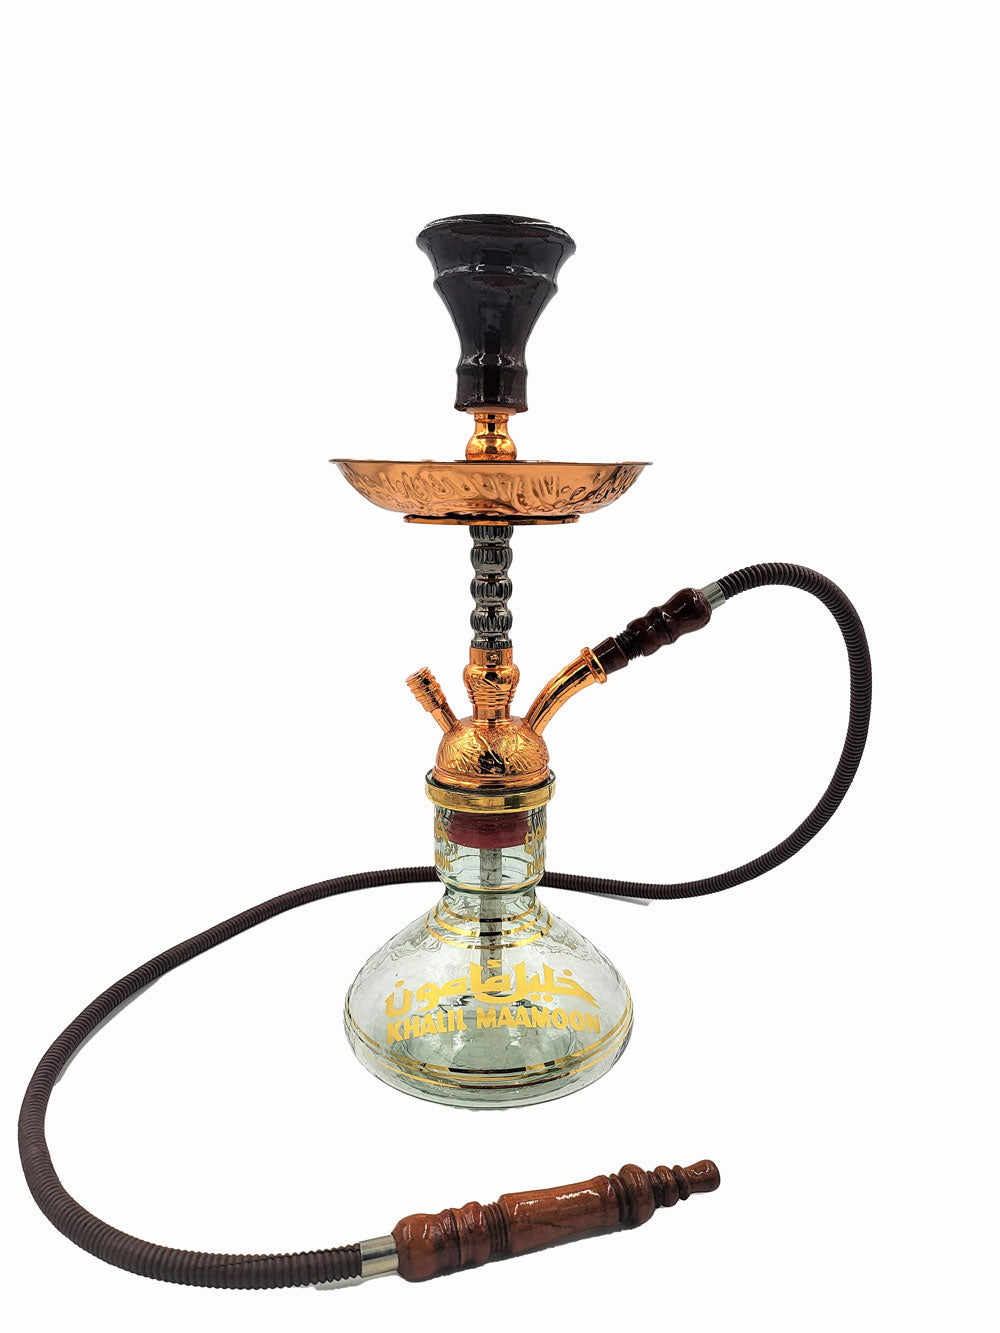  Khalil Mamoon Balaha Oxide Hookah 20 inch black and cobber solid cast stem with clear base